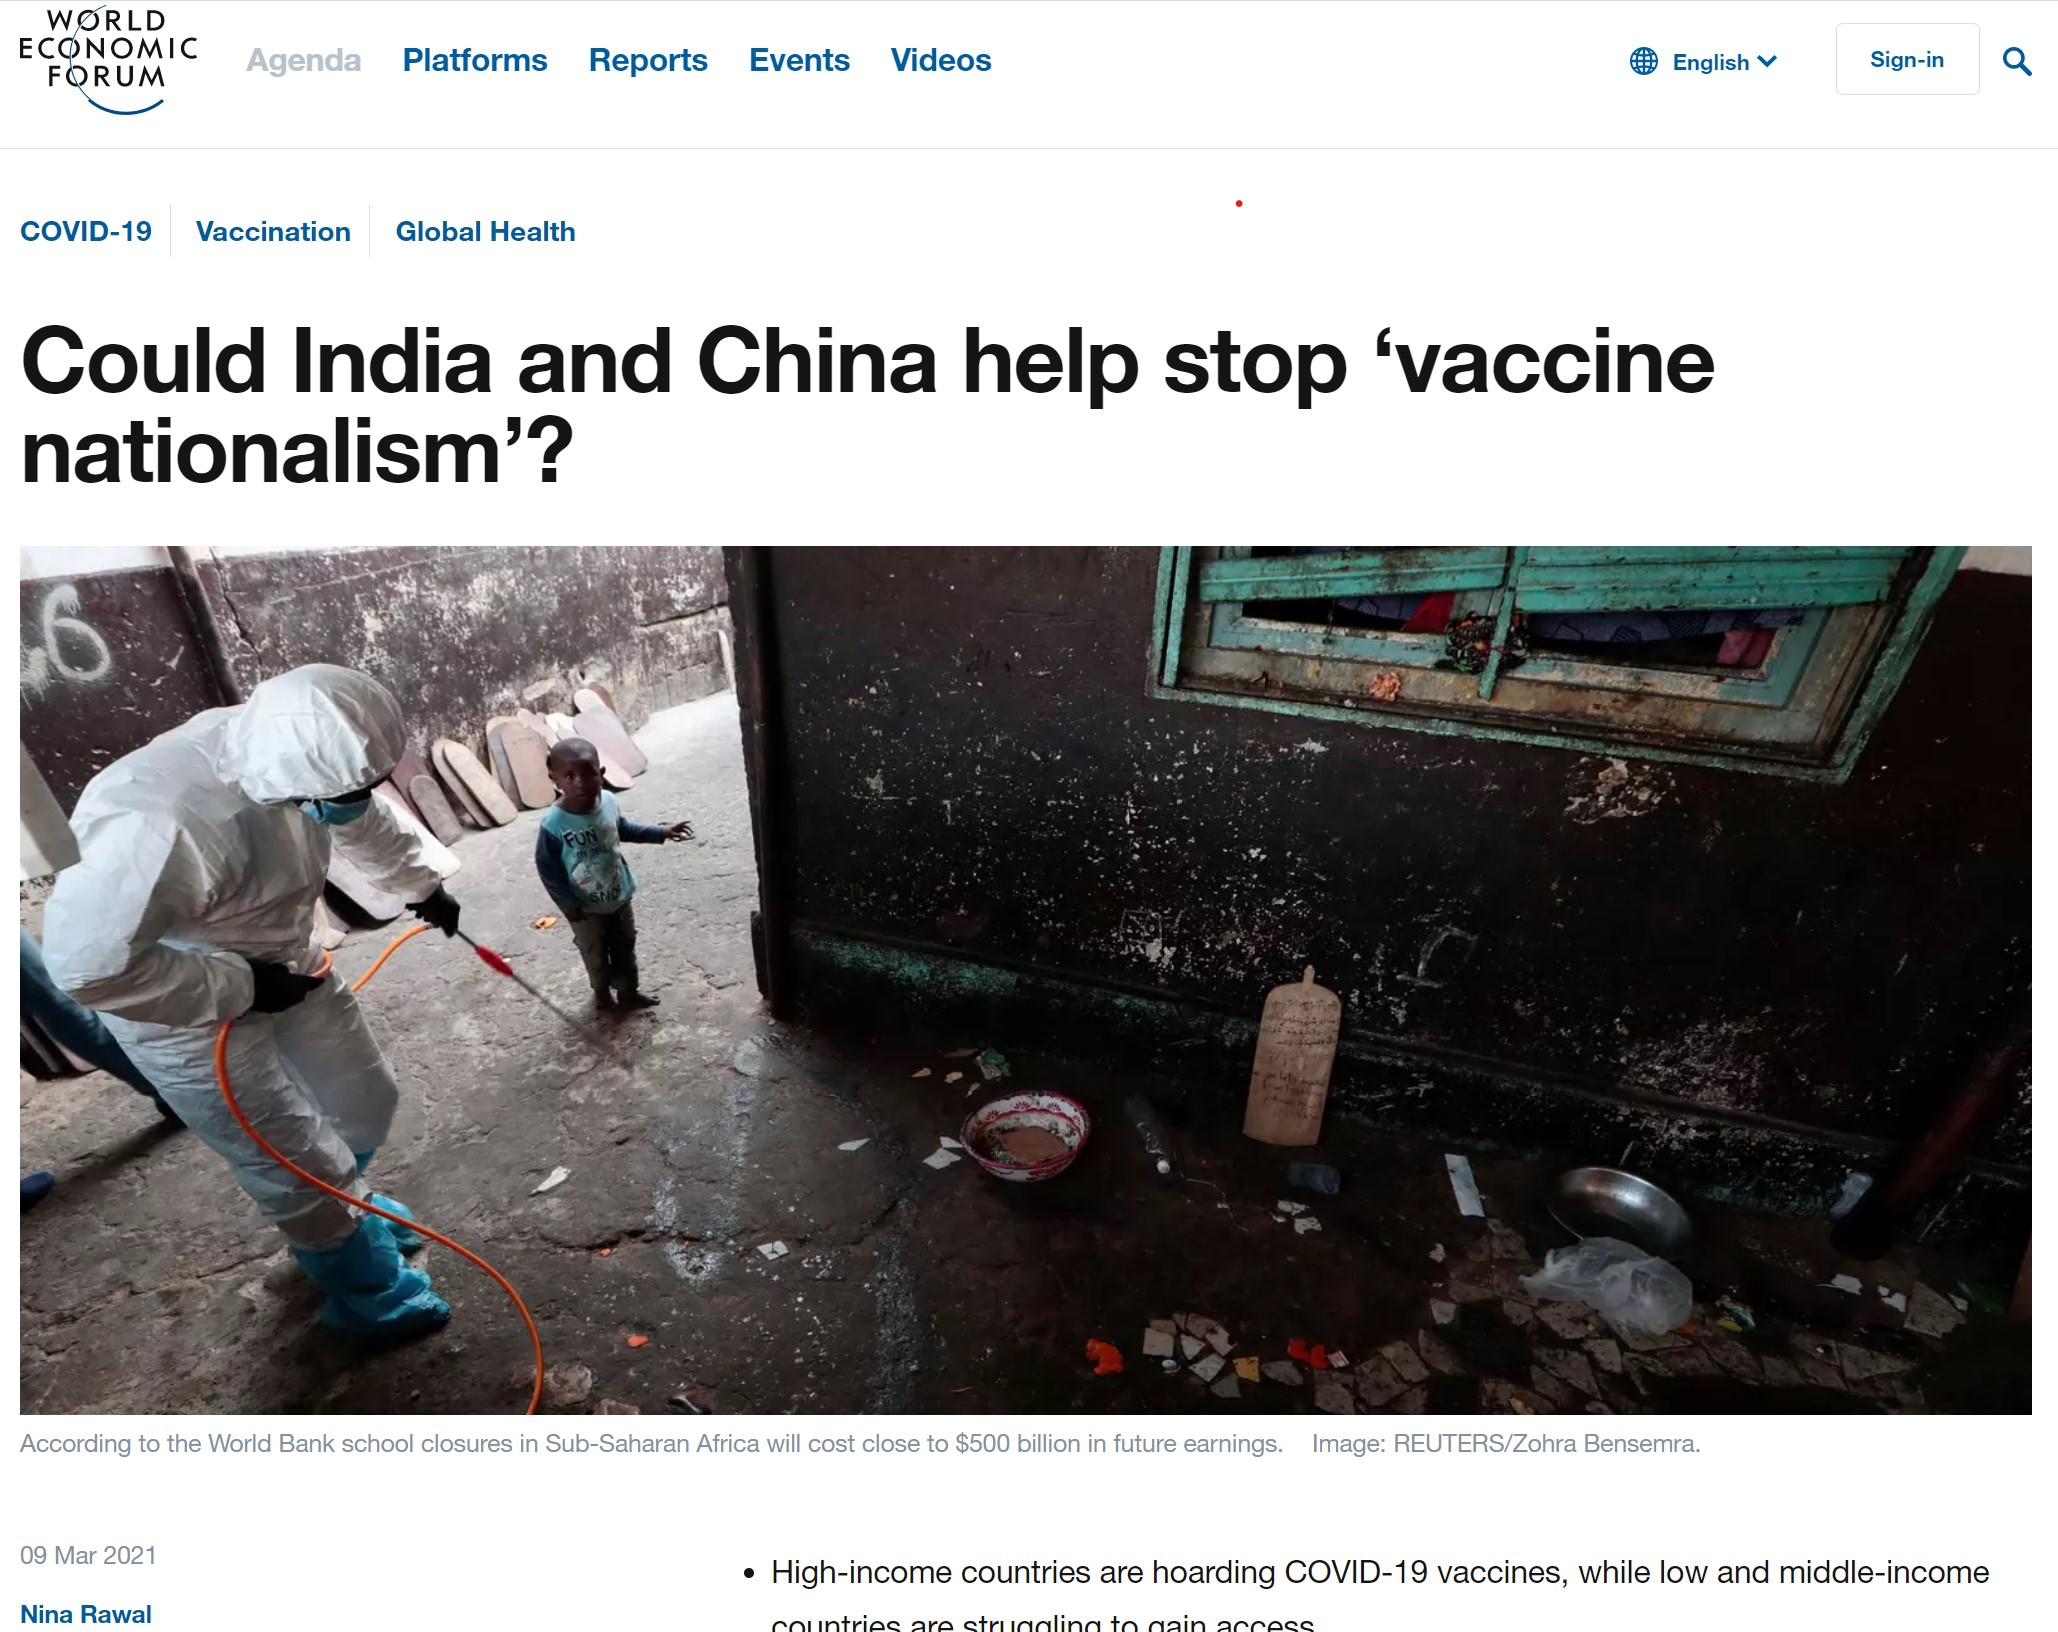 WEF Agenda series on LMIC healthcare in the pandemic, Part II